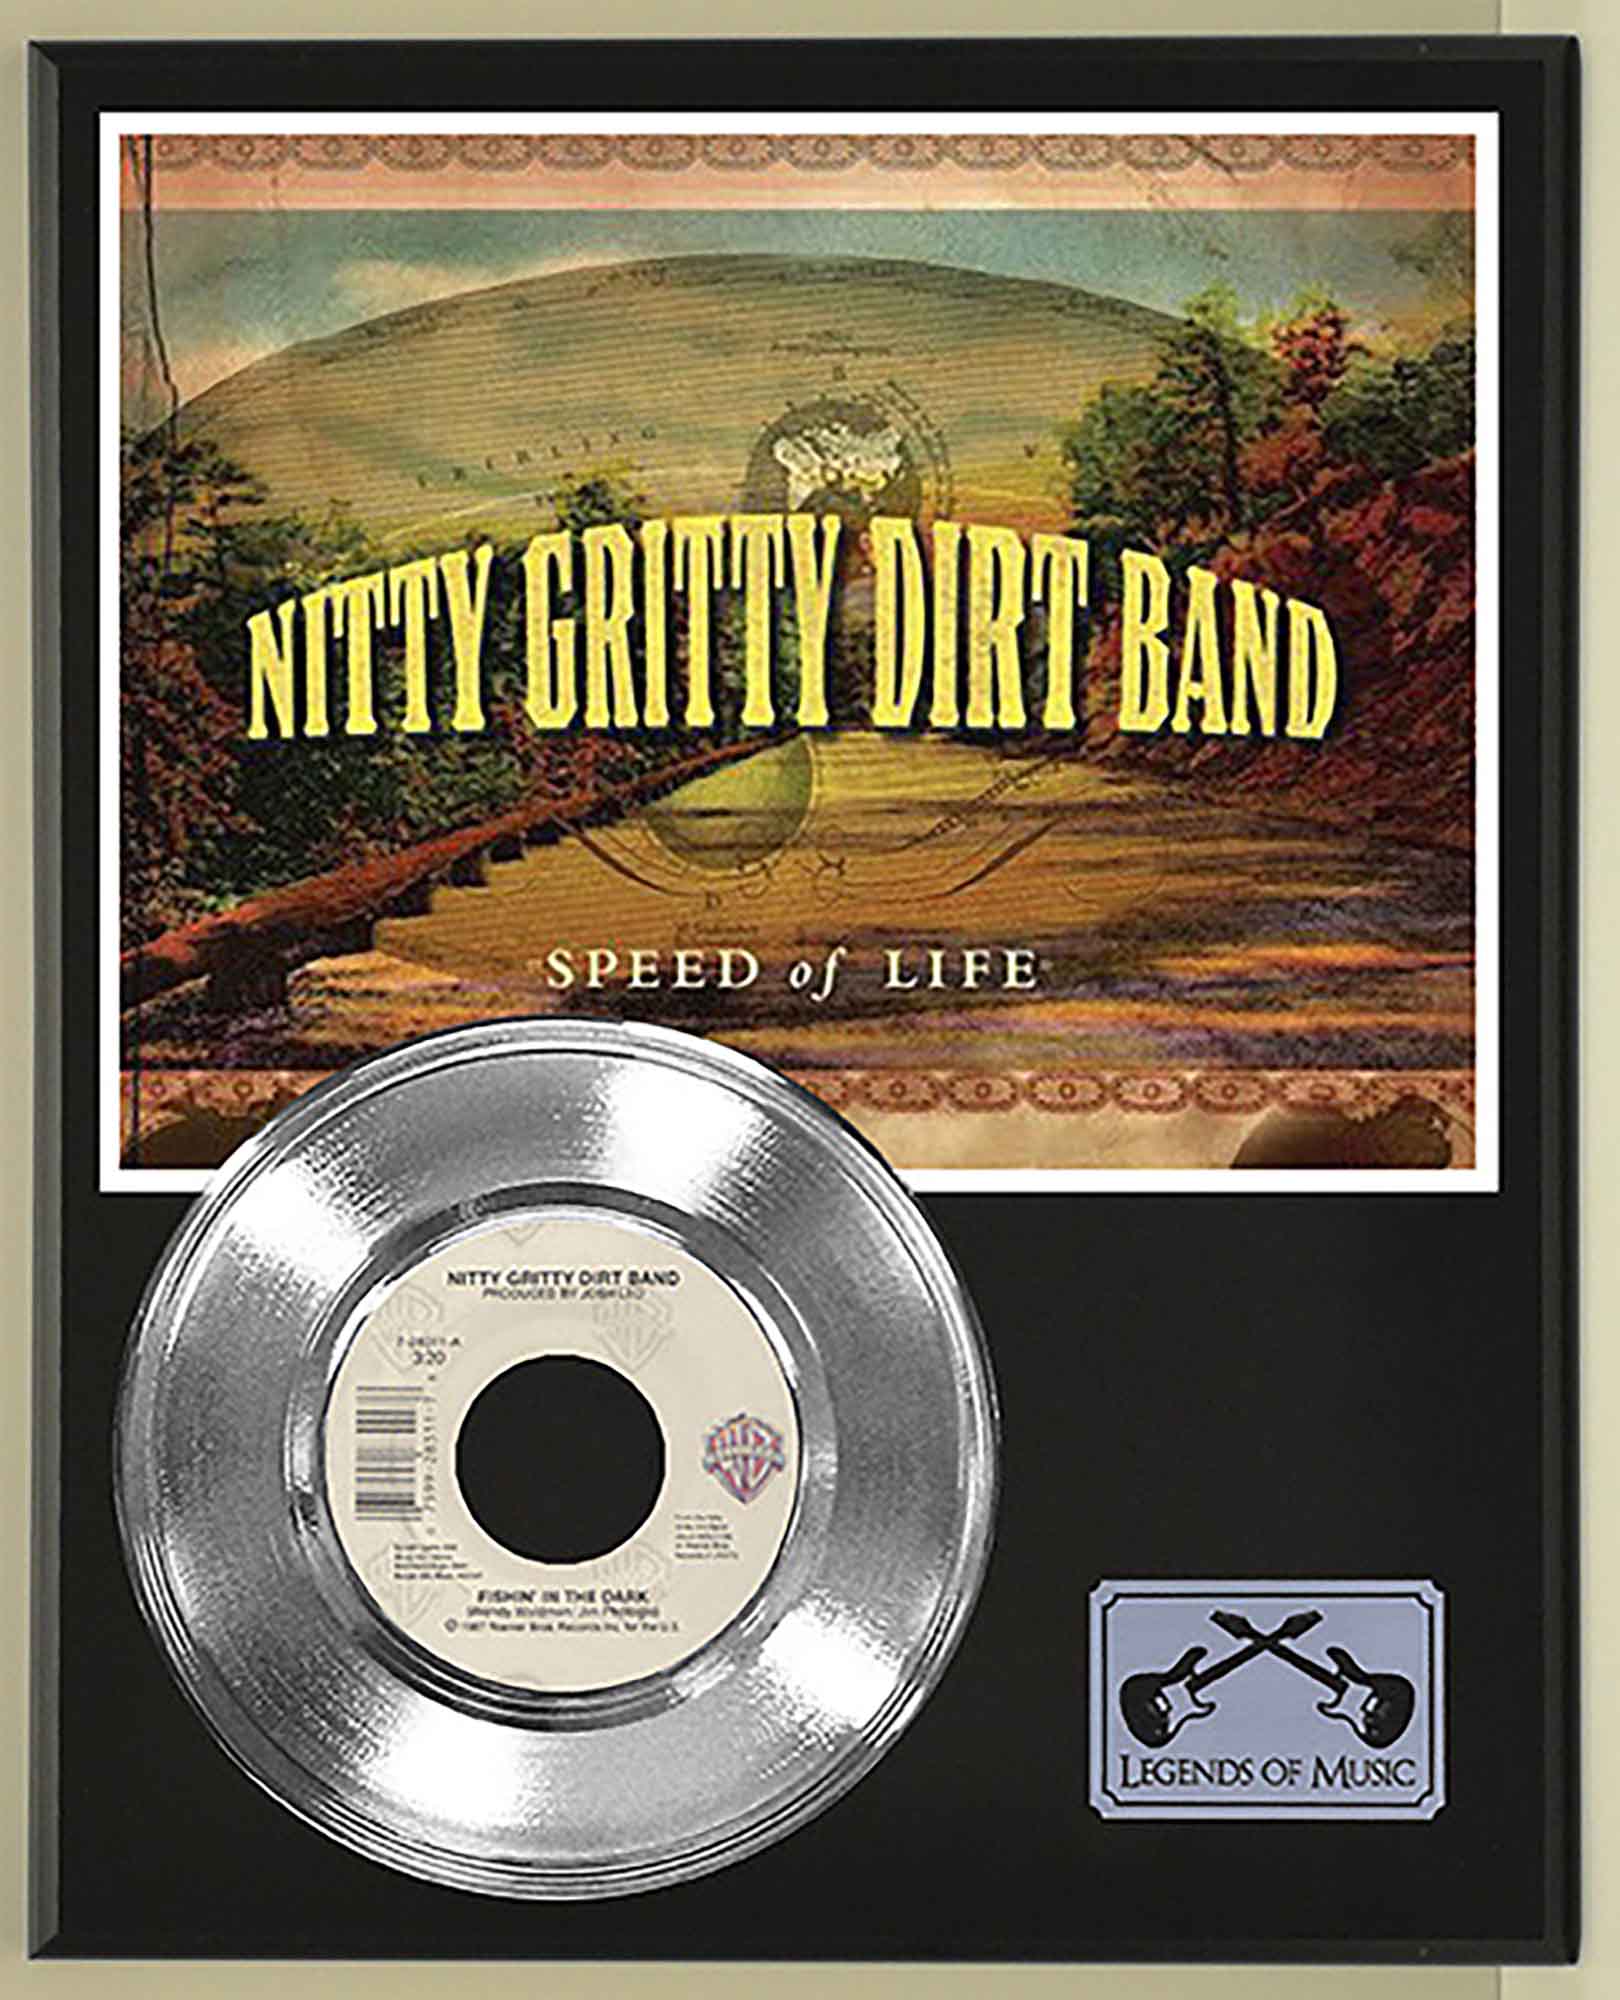 Nitty Gritty Dirt Band - Fishin In The Dark Platinum 45 Record Ltd Edition  Display Award Quality - Gold Record Outlet Album and Disc Collectible  Memorabilia